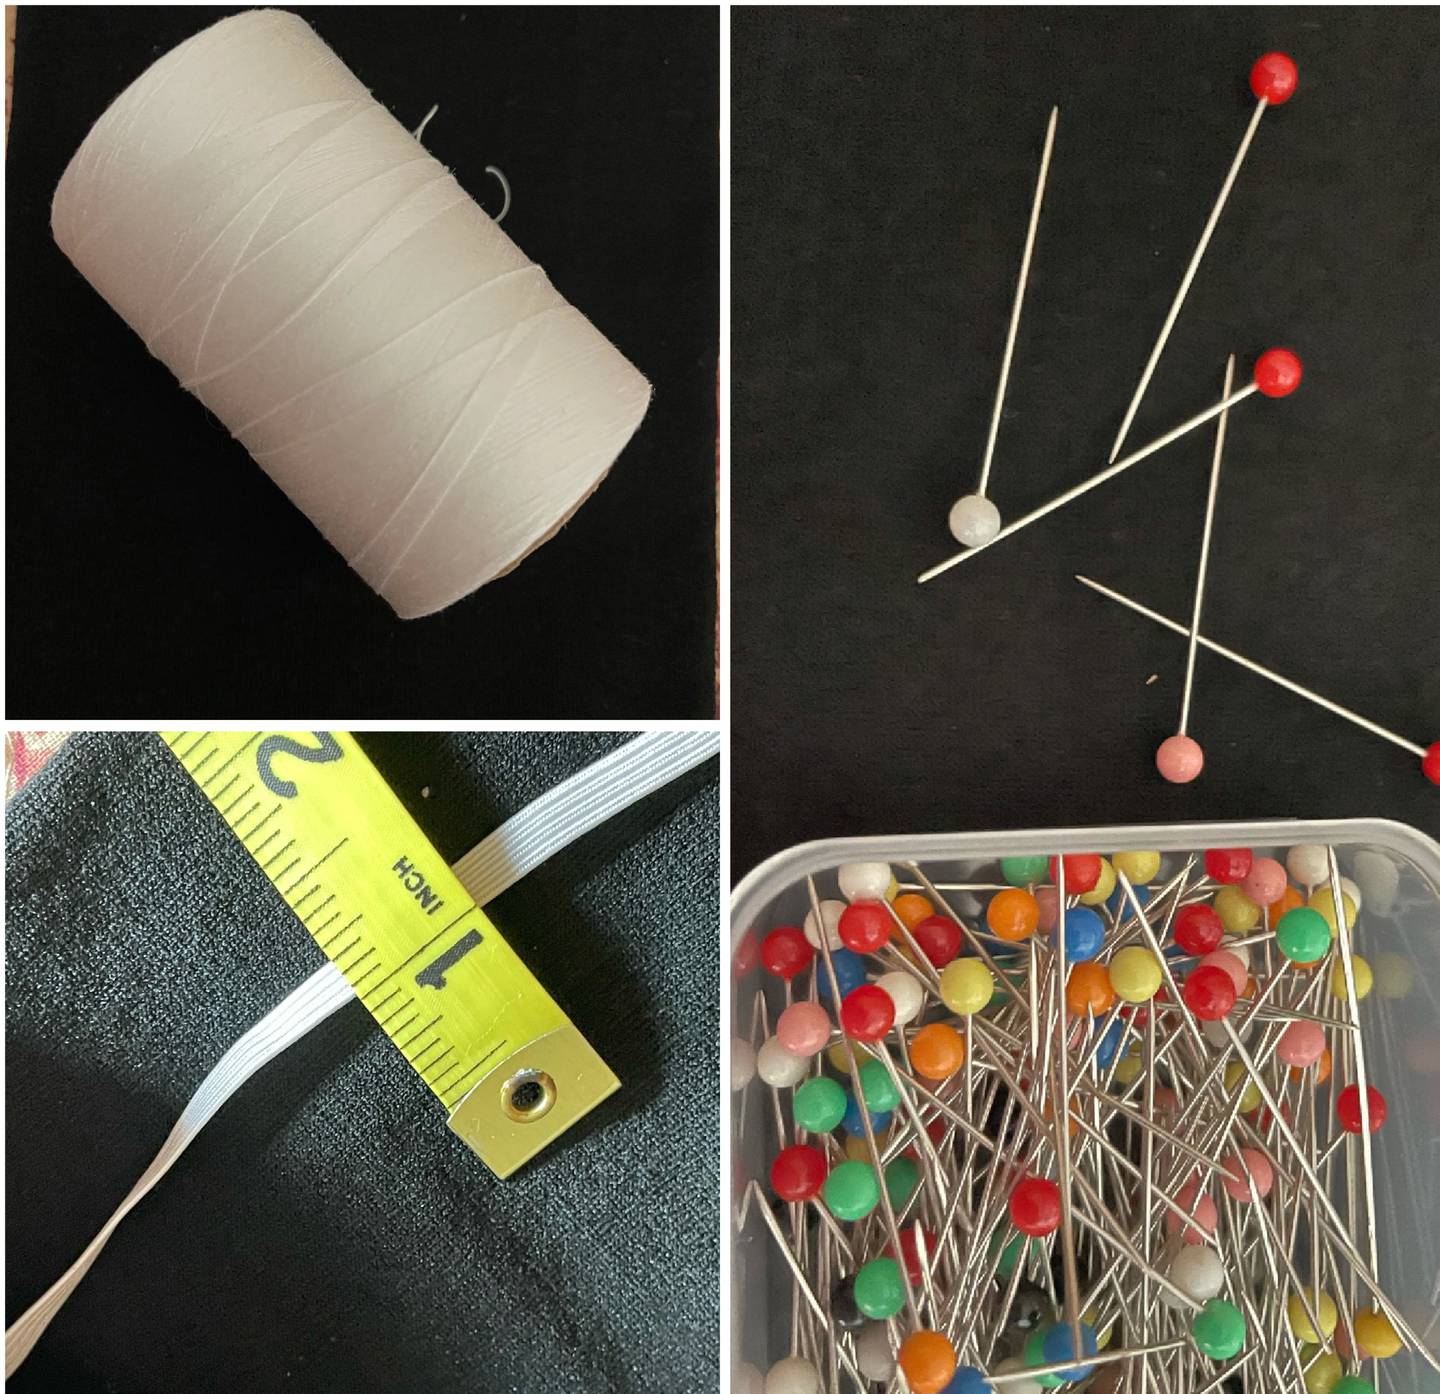 Pictured are the white quilting thread, elastic and straight pins that Kimberly Creasey of Joliet and her crew are using to transform expired surgical drapes into sleeping bags for people from the Ukraine who need them.